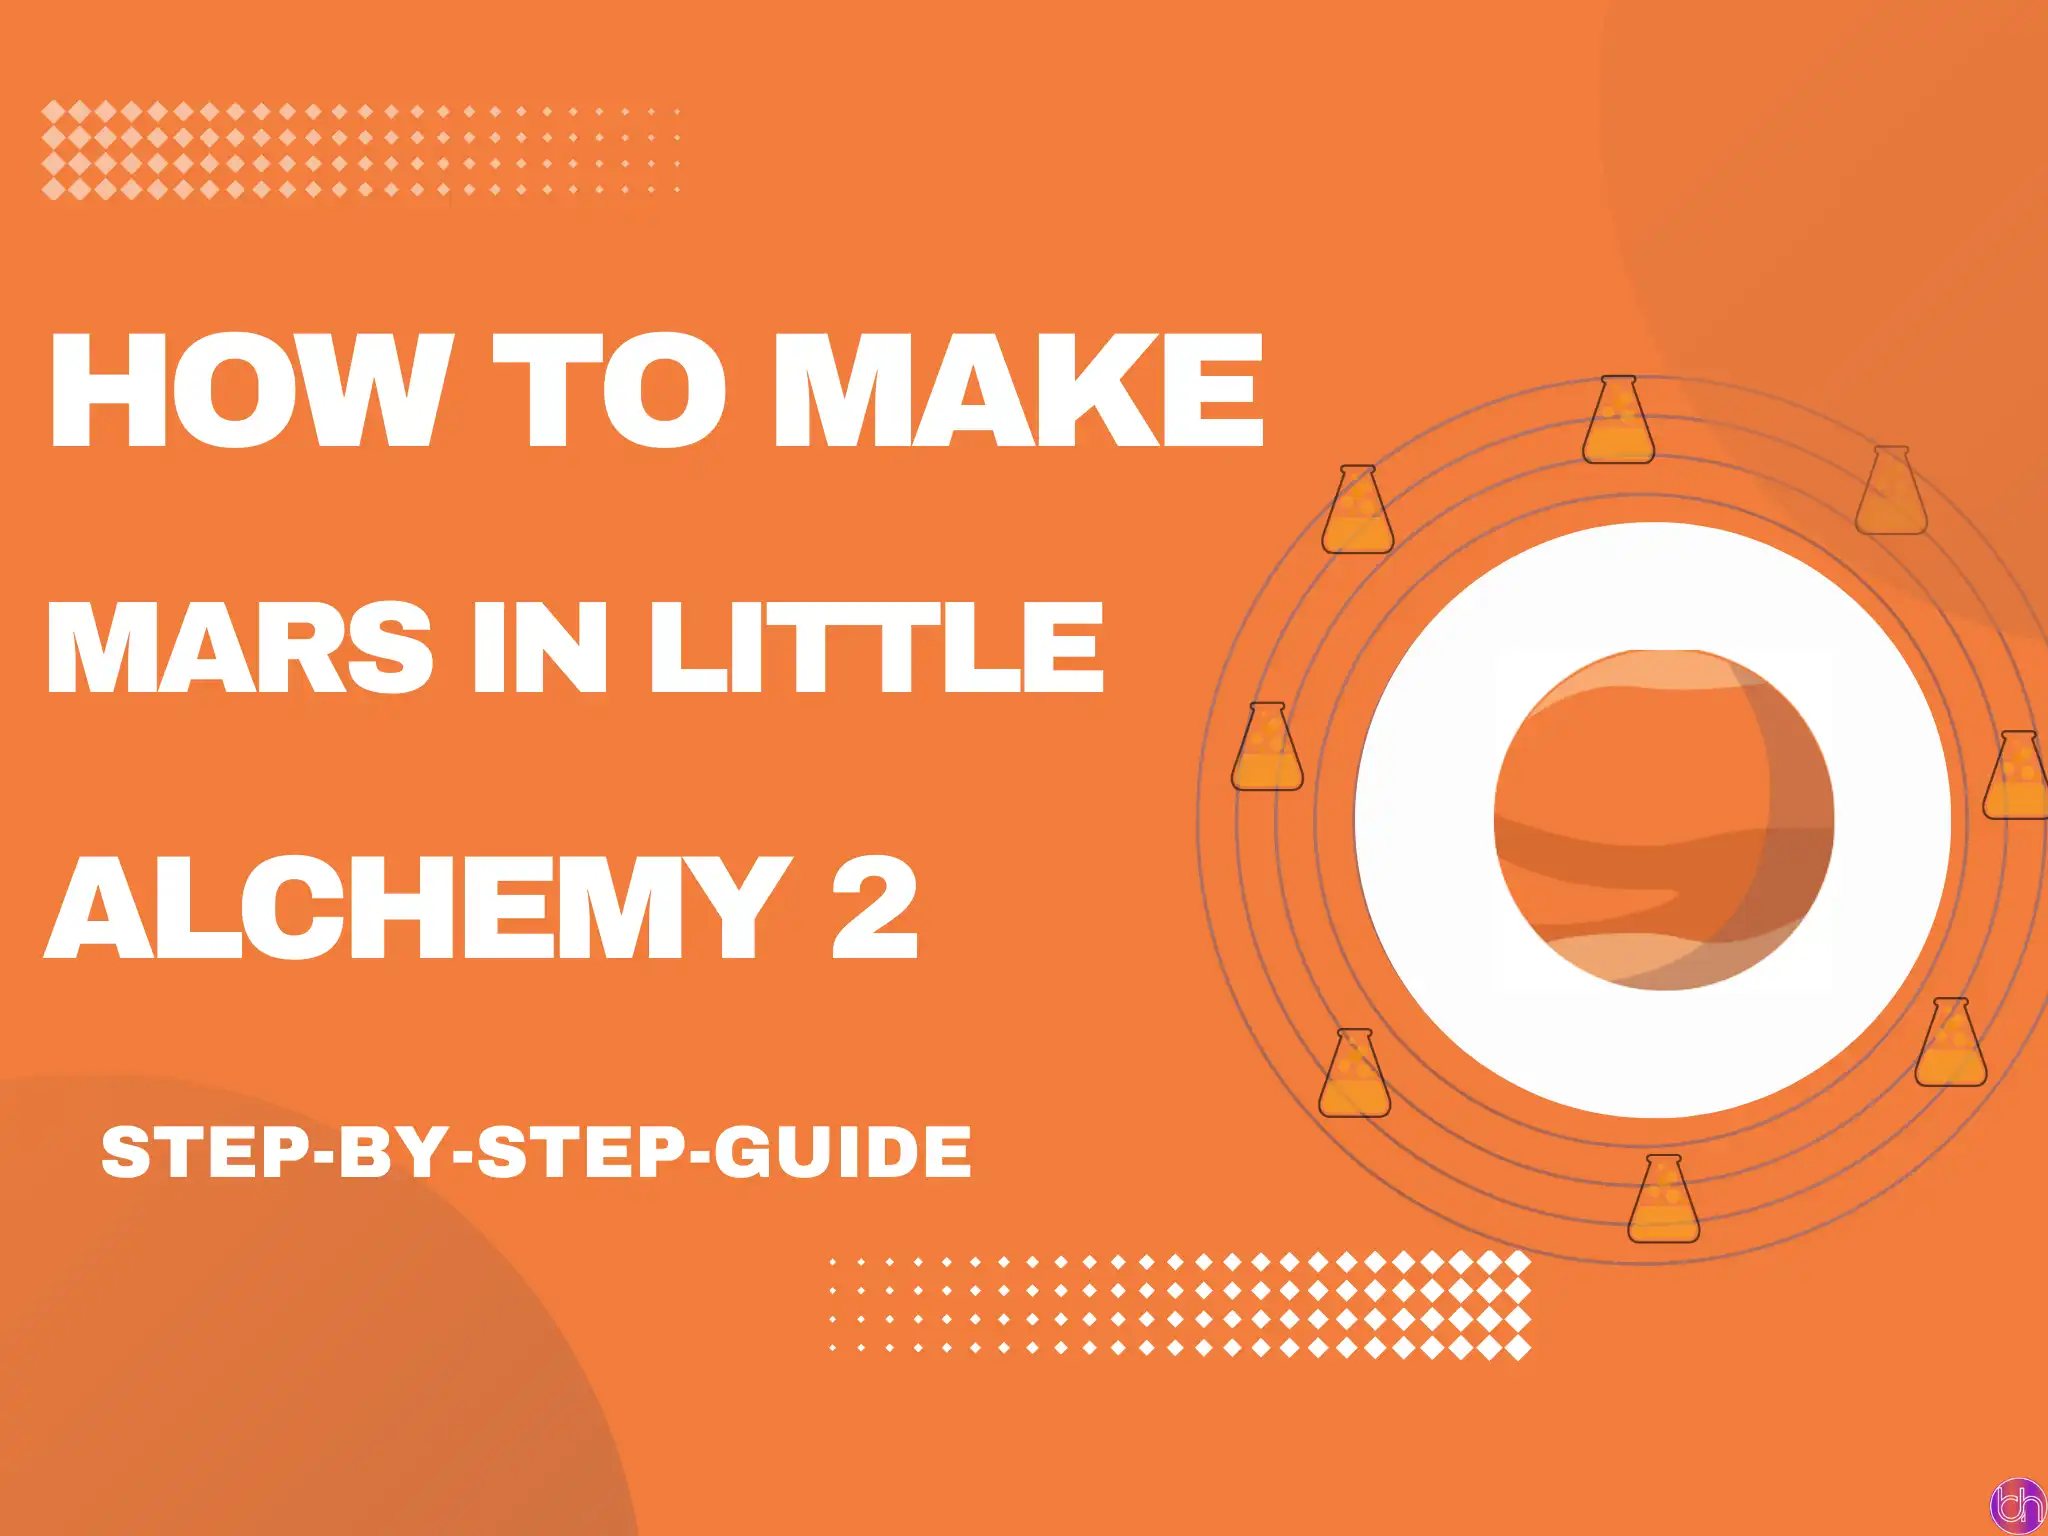 How to make Mars in Little Alchemy 2